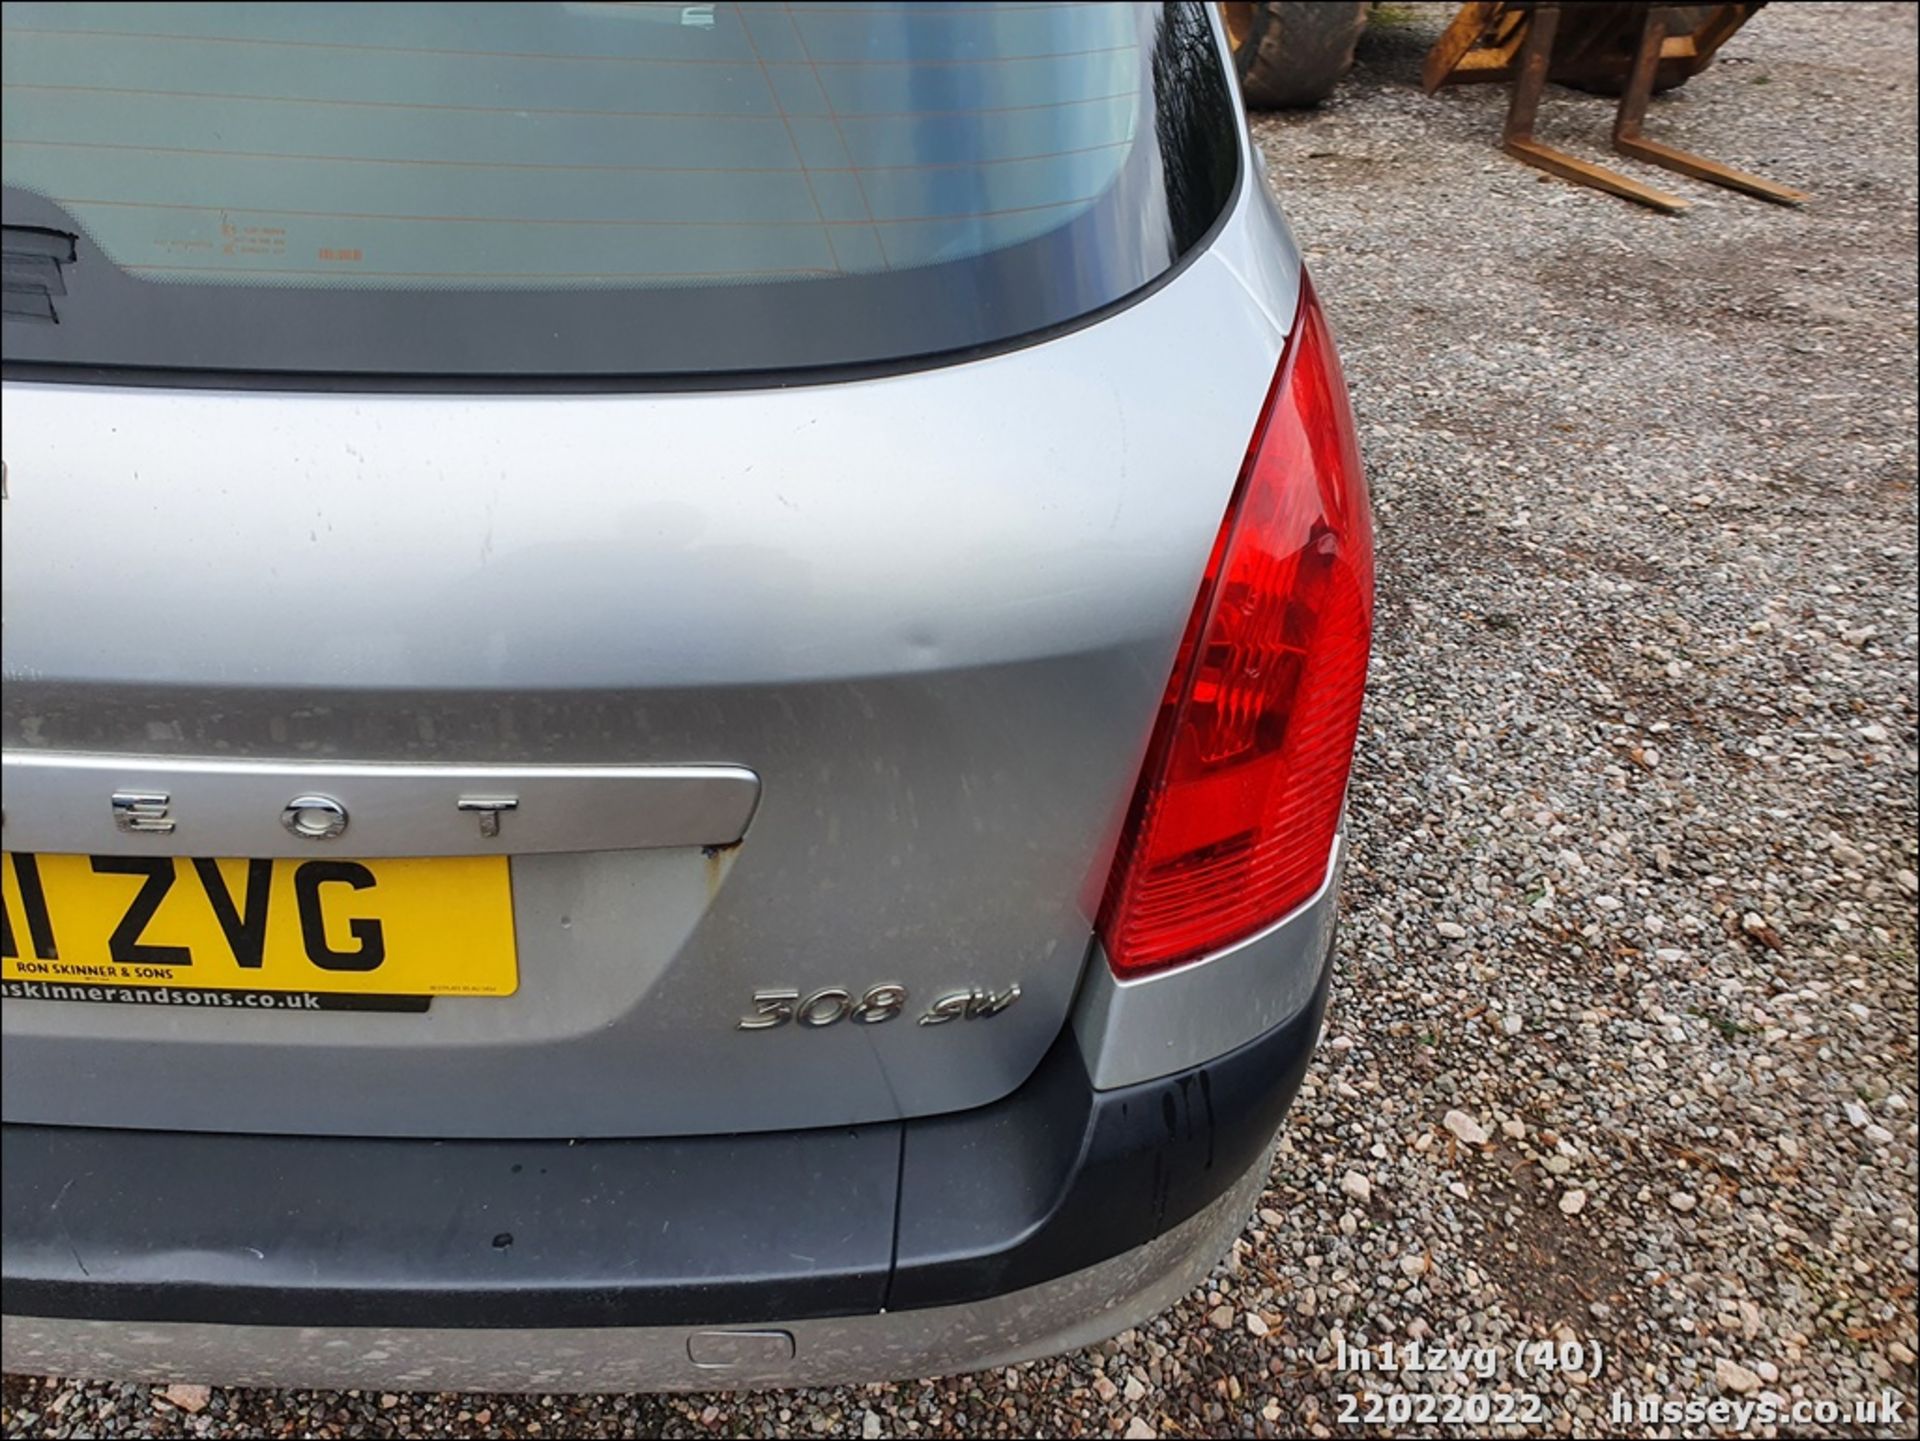 11/11 PEUGEOT 308 S SW HDI 92 - 1560cc 5dr Estate (Silver, 115k) - Image 40 of 46